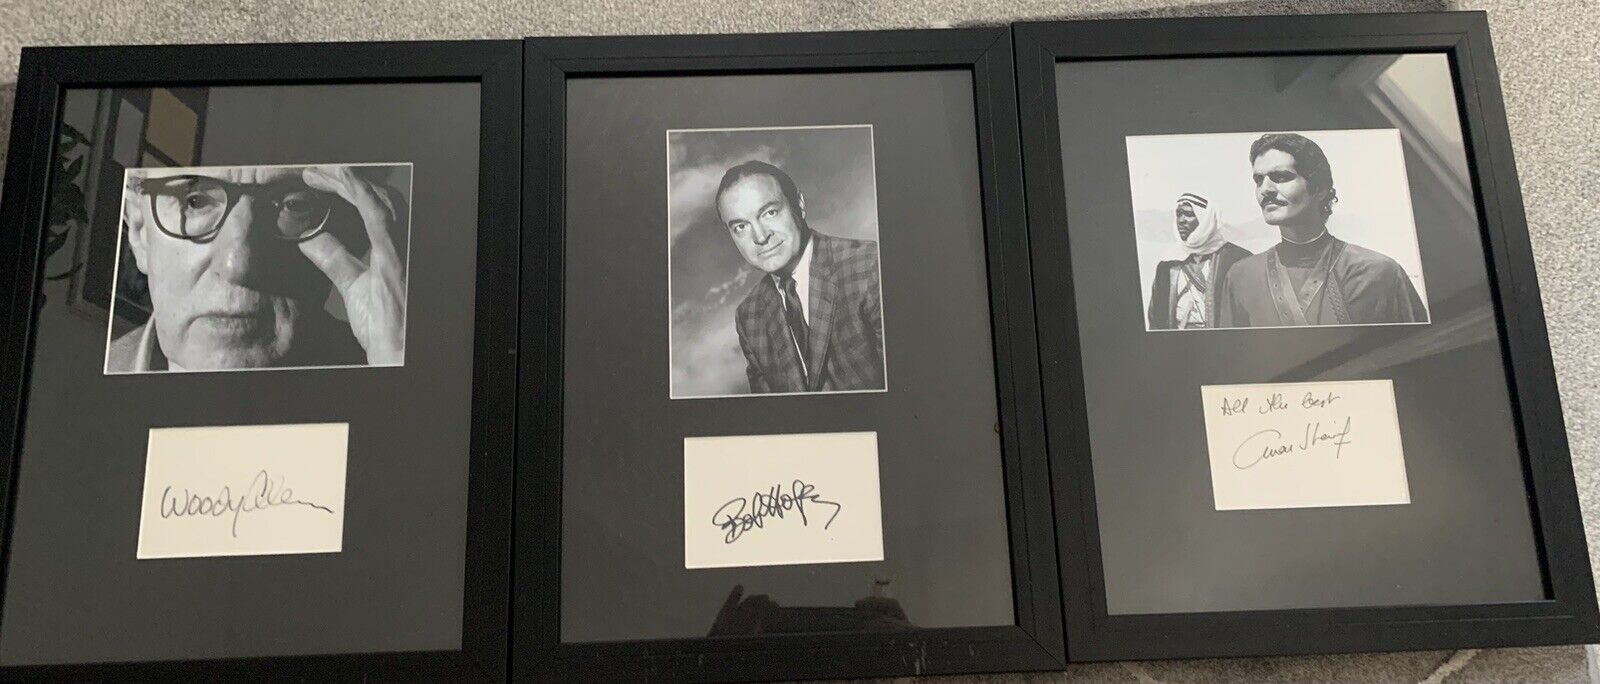 BOB HOPE & WOODY ALLEN & OMAR SHARIF hand signed Displays with Copy Letter